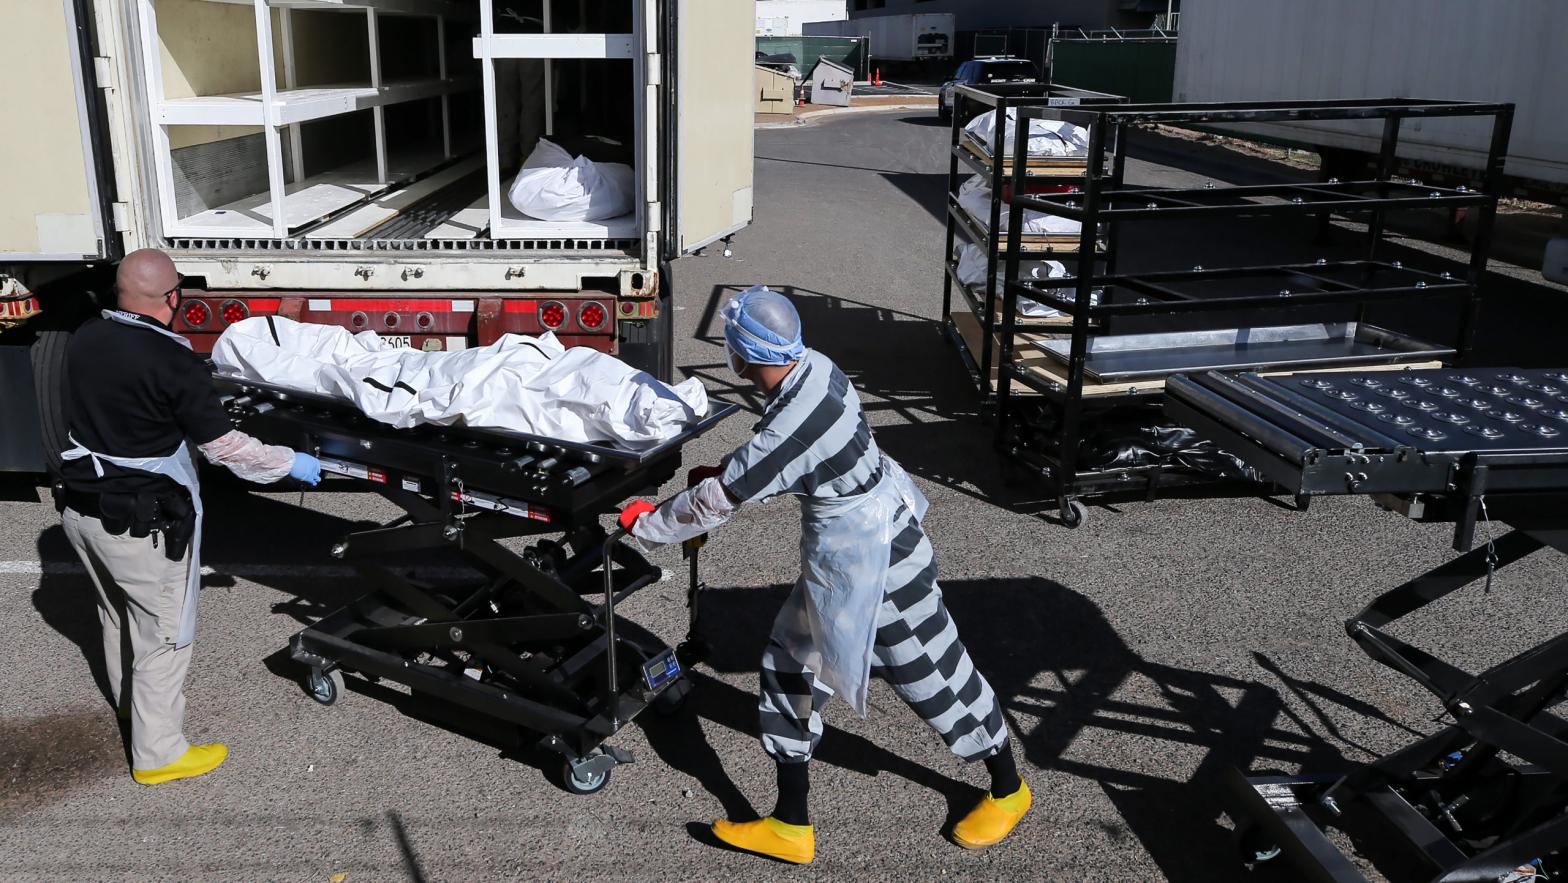 An inmate (centre) works loading bodies wrapped in plastic into a refrigerated temporary morgue trailer in a parking lot of the El Paso County Medical Examiner's office on November 17, 2020 in El Paso, Texas. (Photo: Mario Tama, Getty Images)